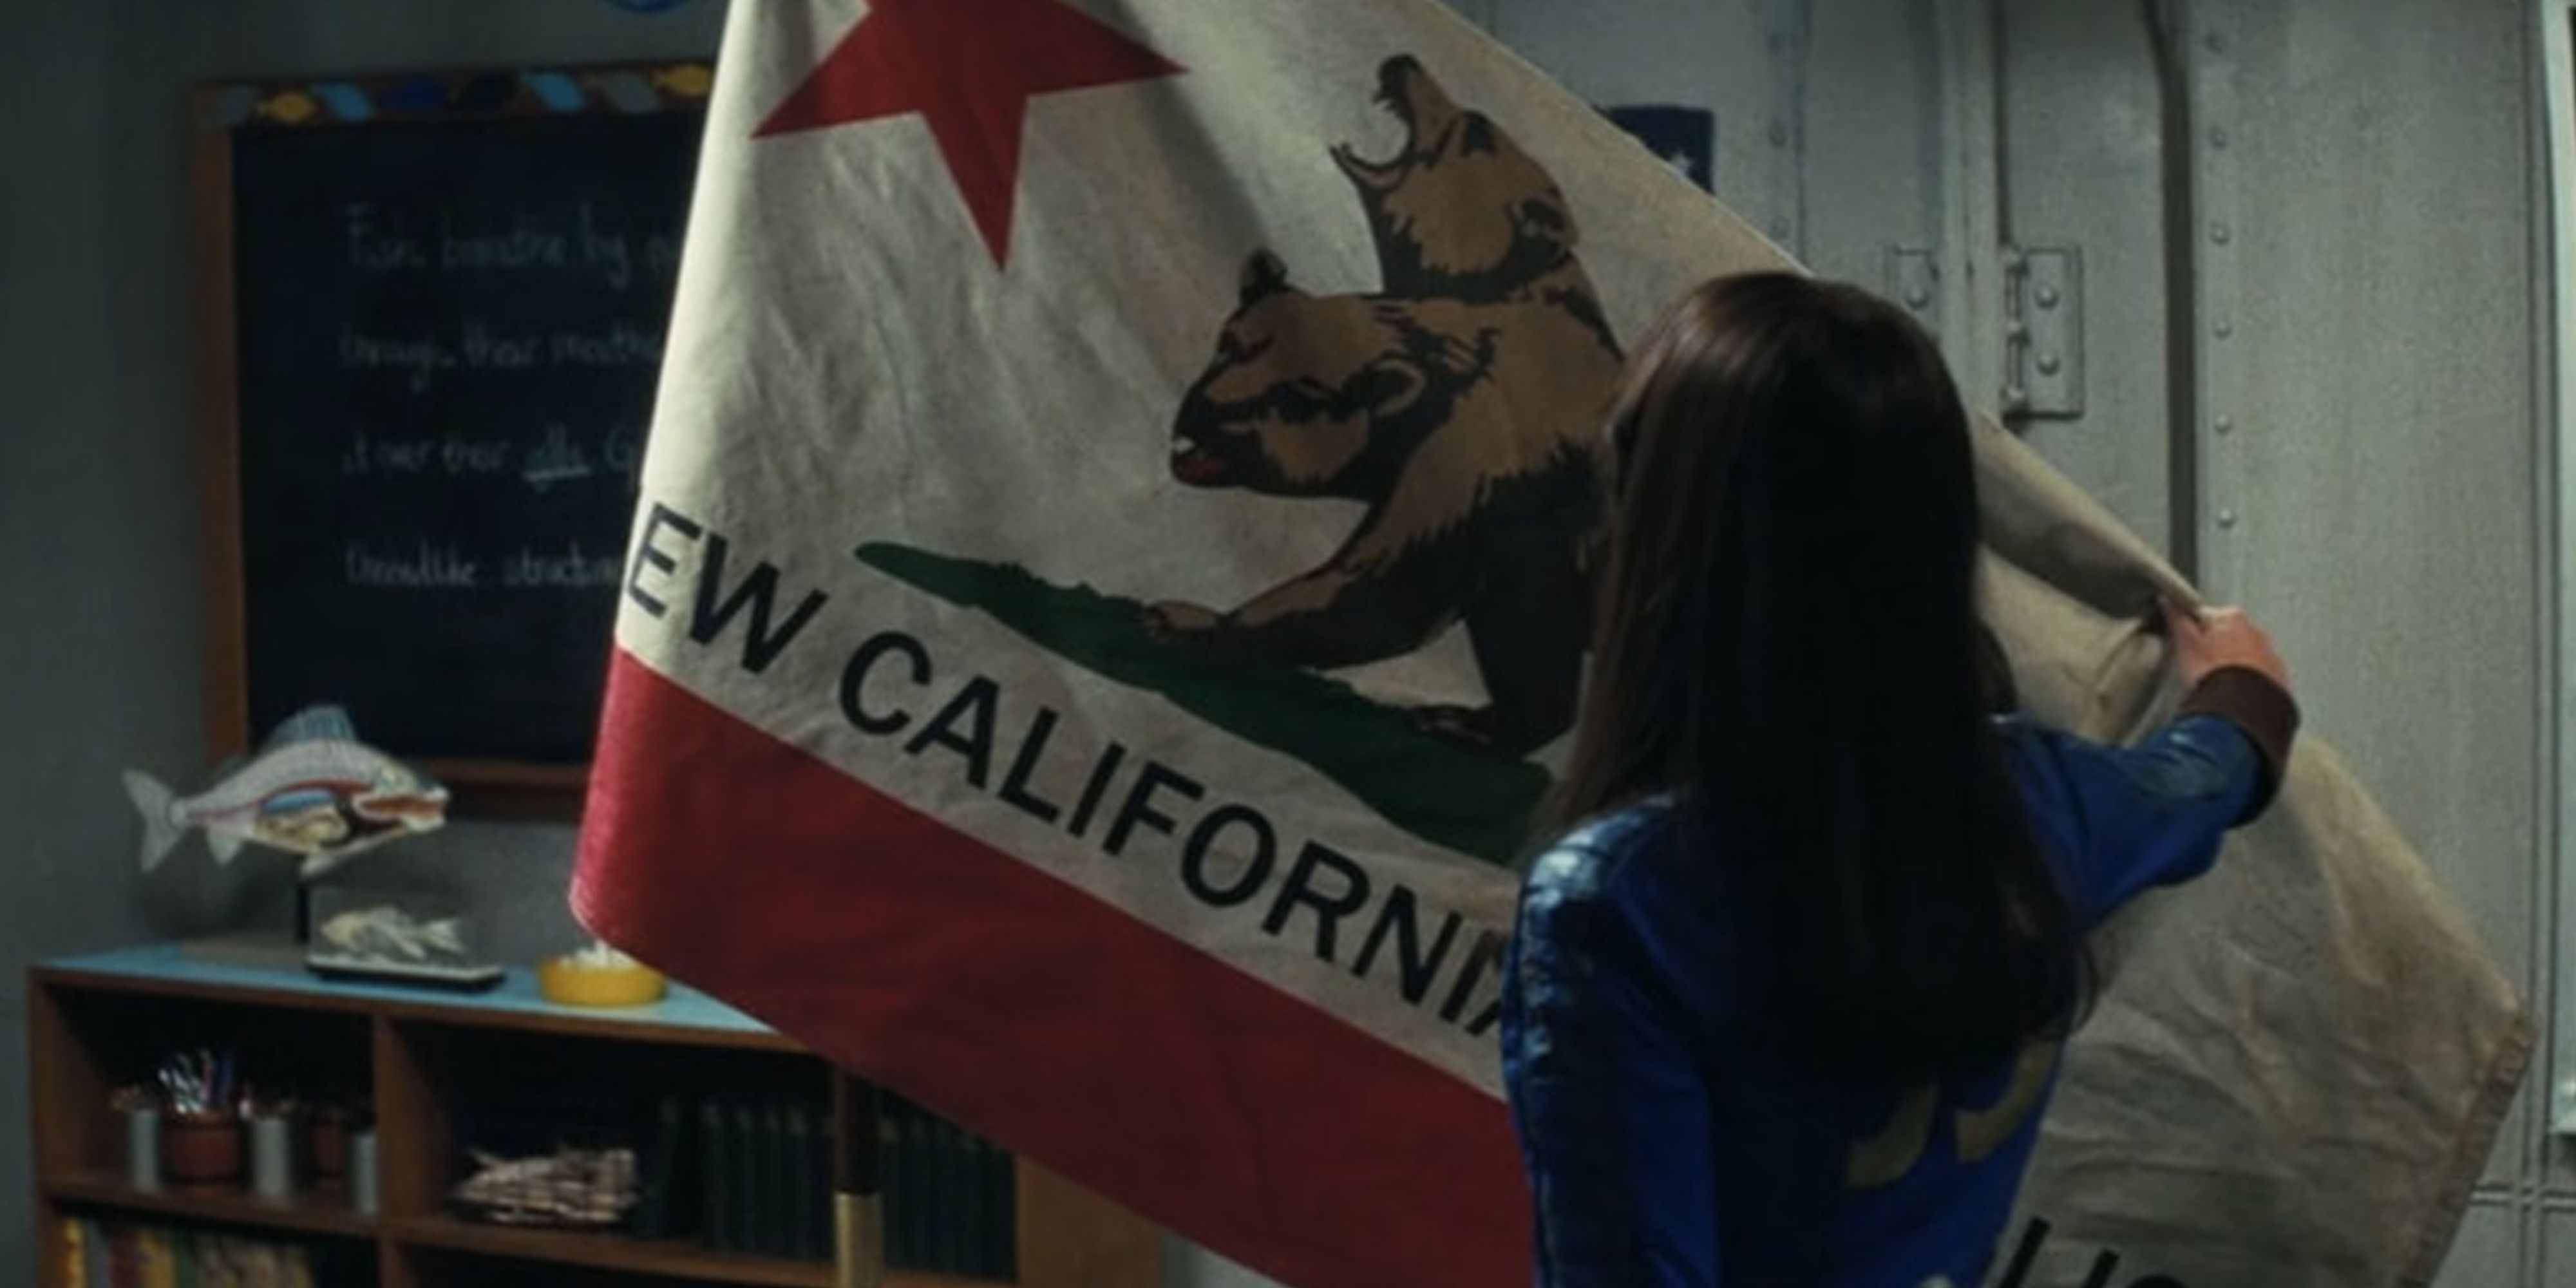 Fallout TV series Lucy unfurling the NCR flag in a vault classroom